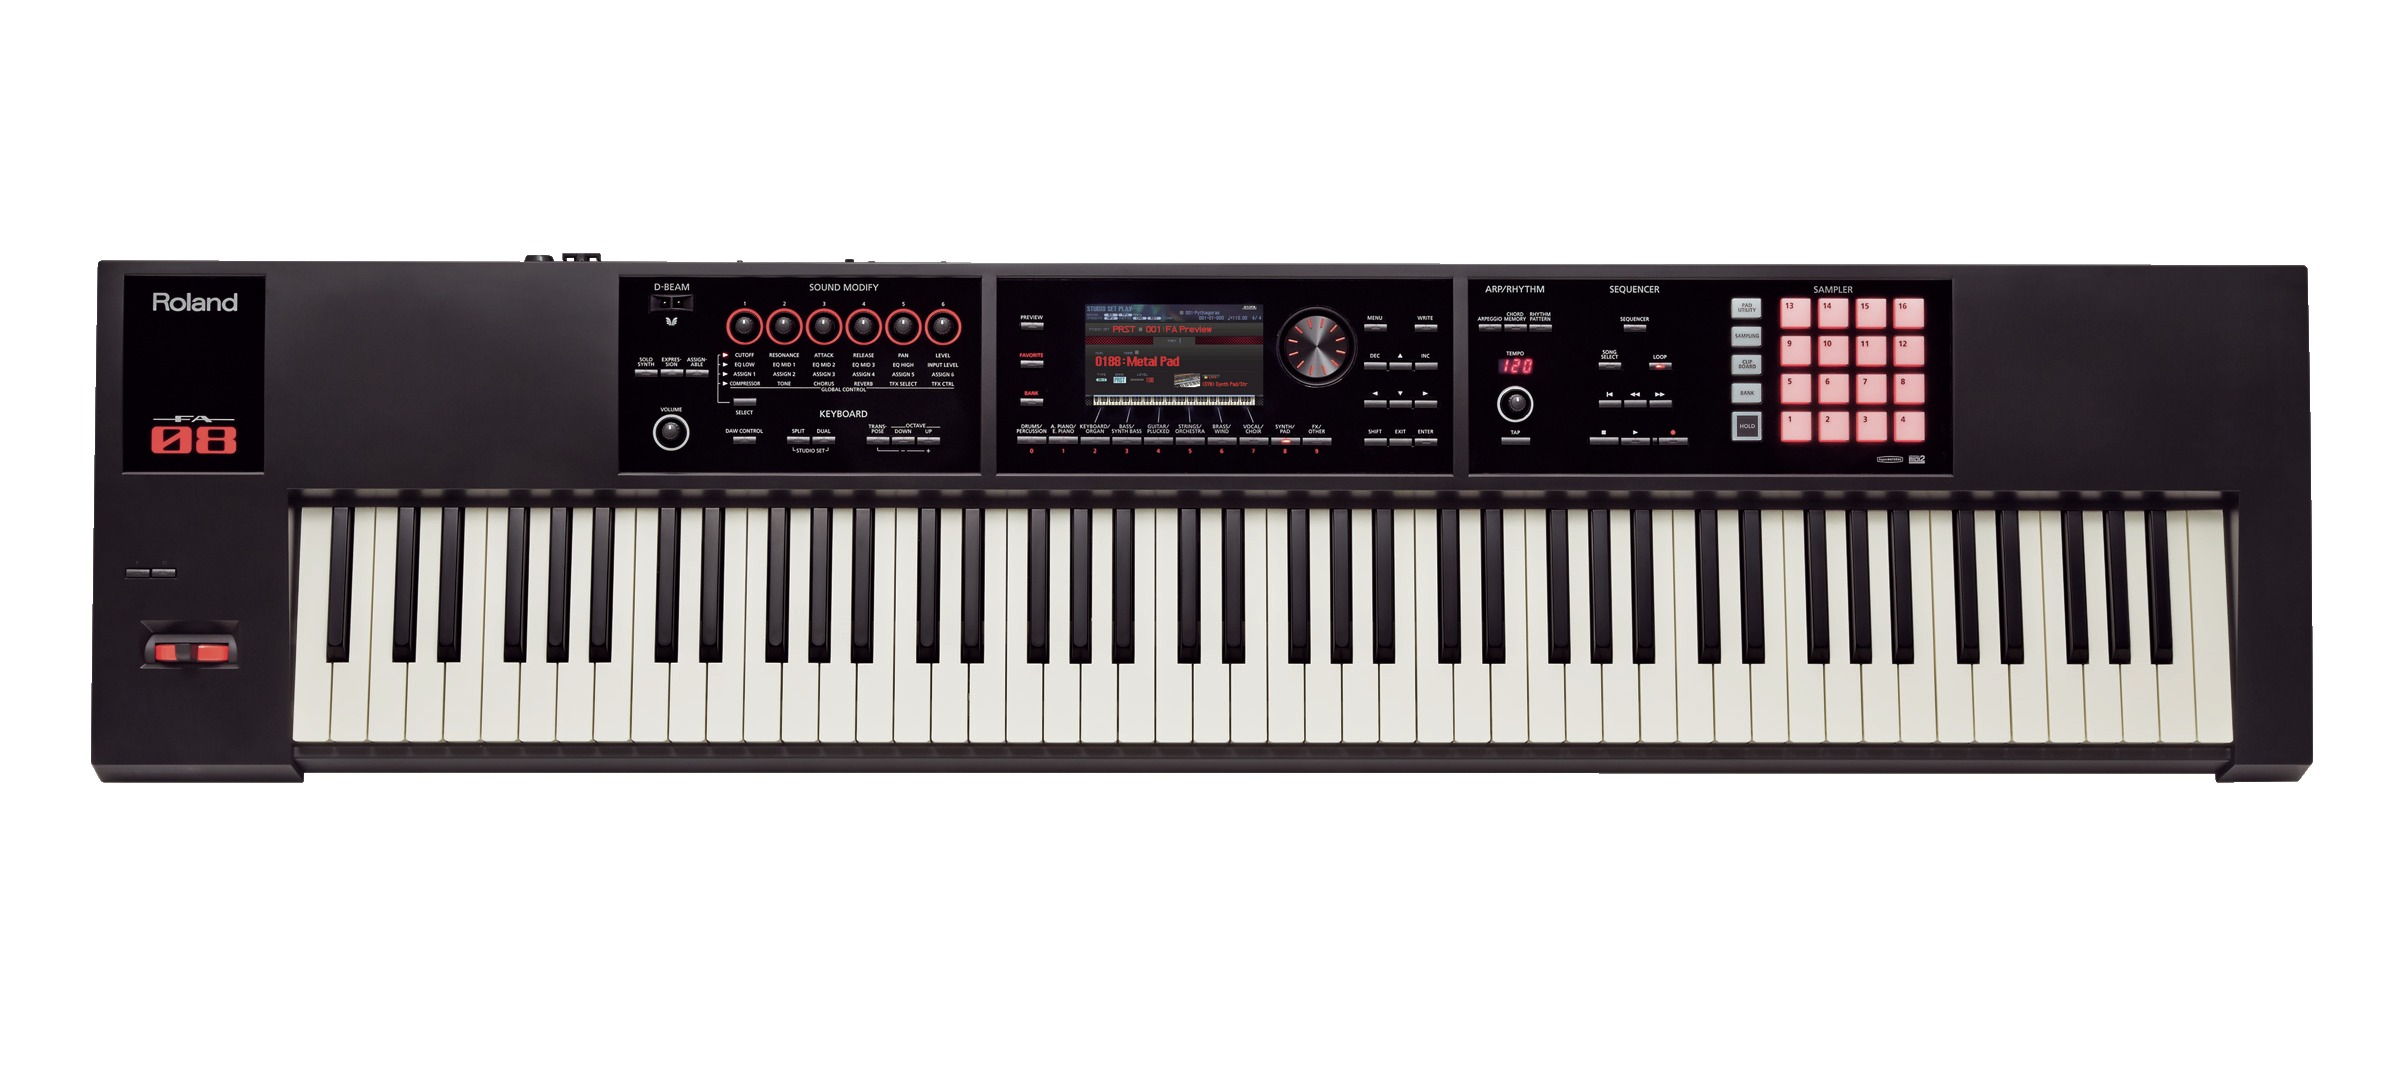 Claviers & Pianos - WORKSTATIONS - ROLAND - FA-08 - Royez Musik